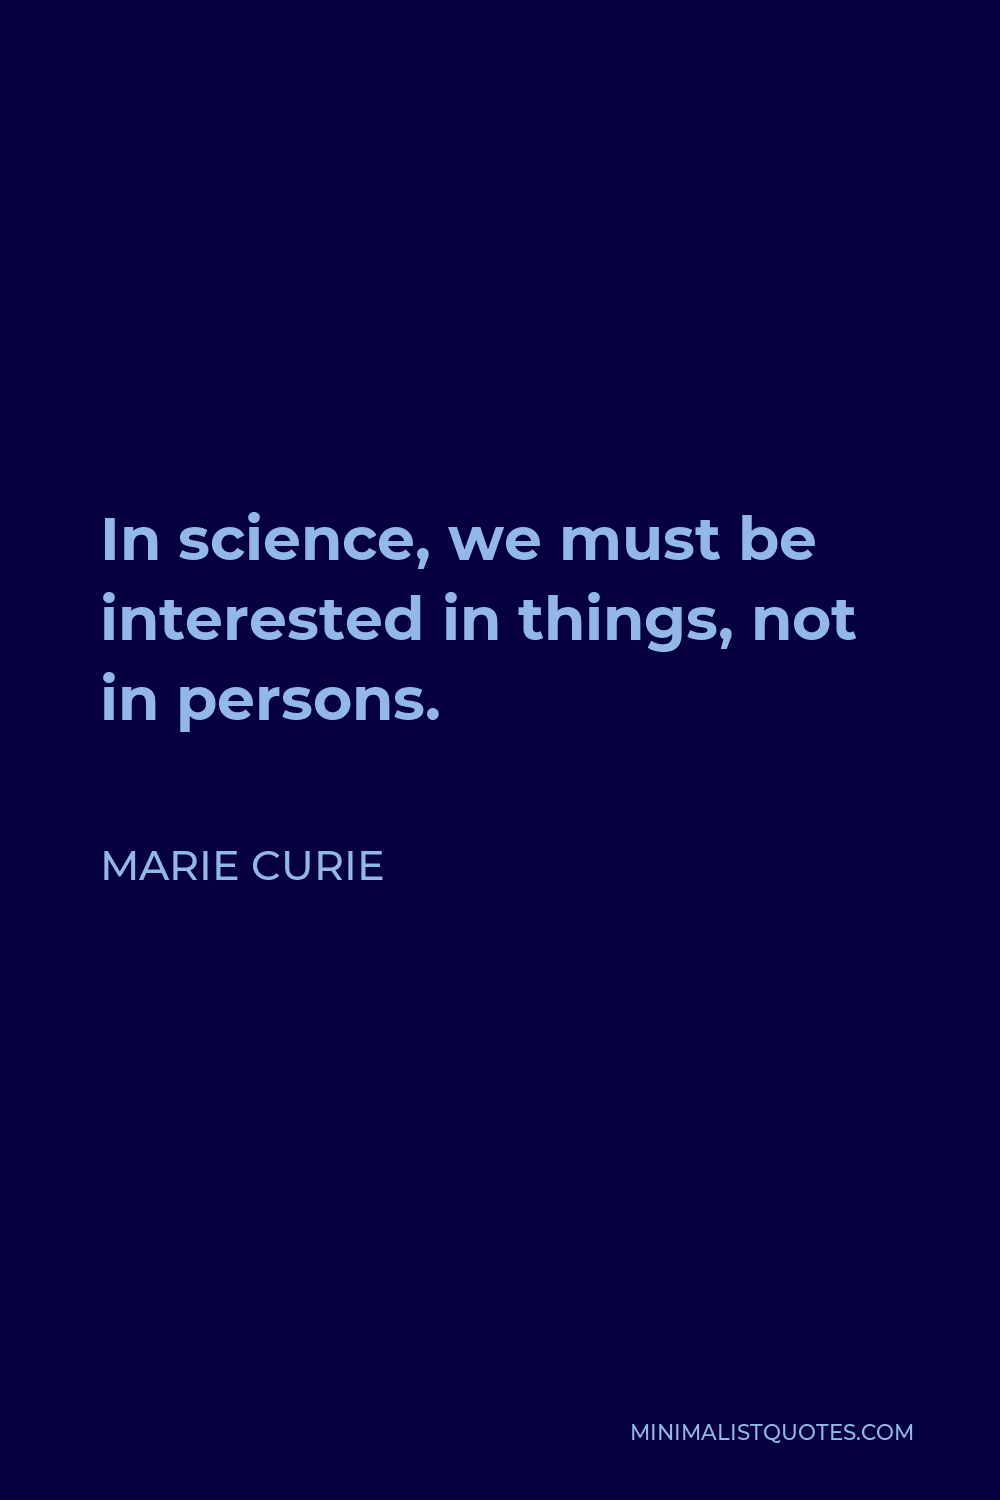 Marie Curie Quote - In science, we must be interested in things, not in persons.